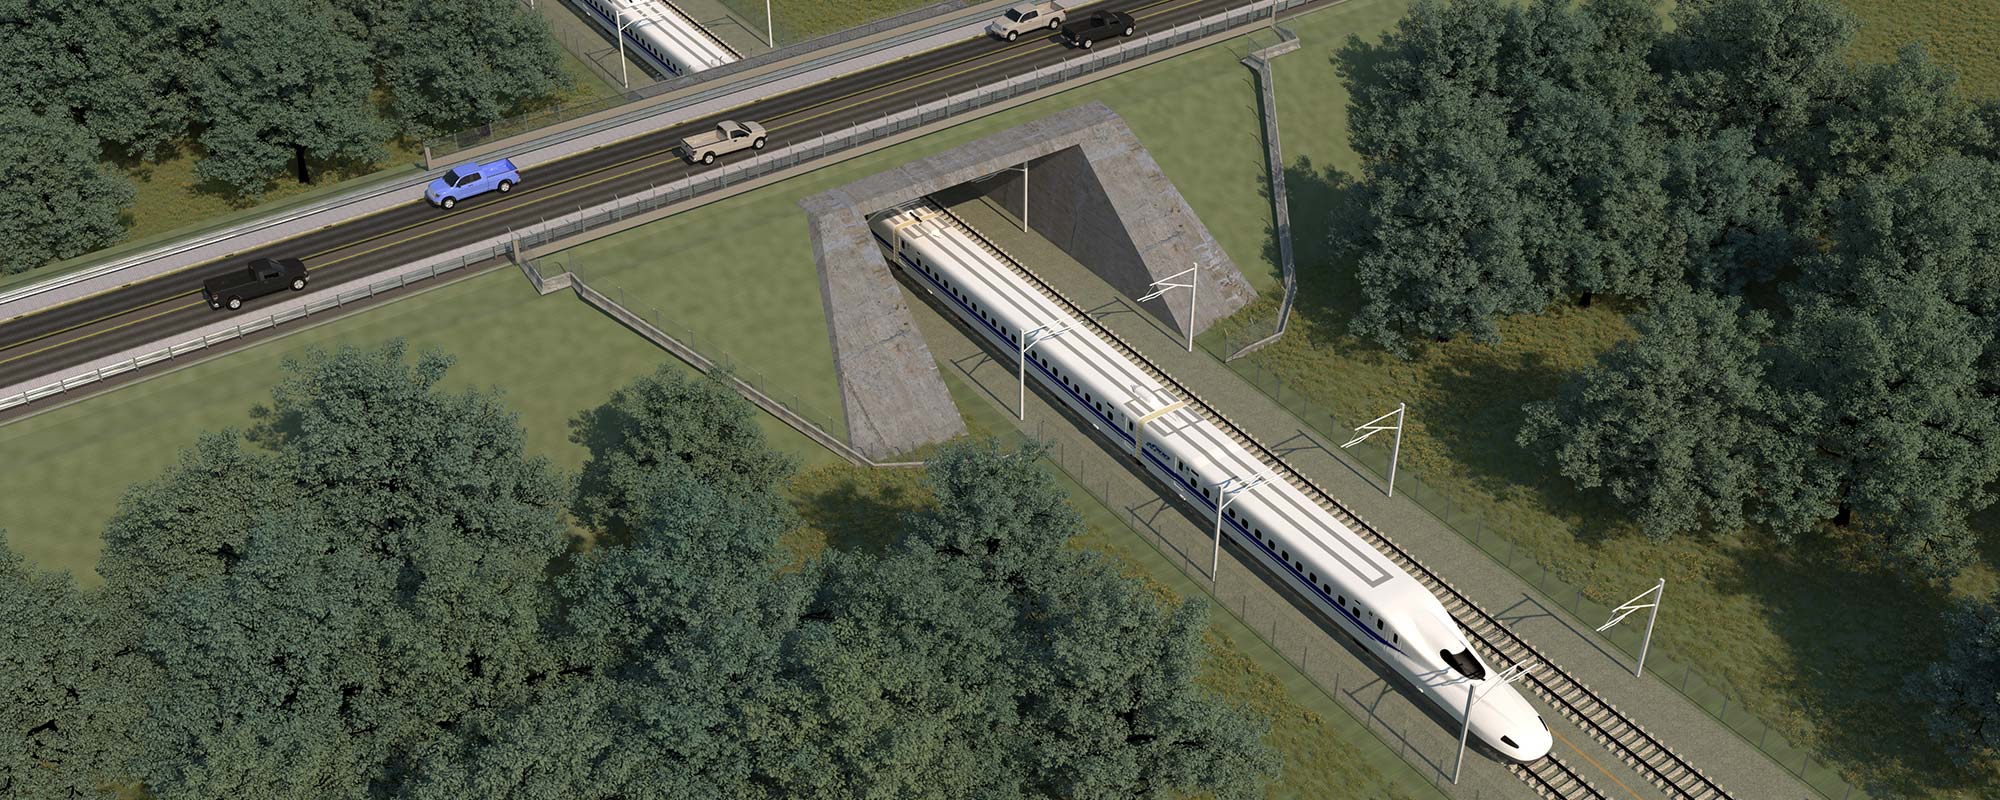 Rendering of Texas Central High-Speed Rail Road